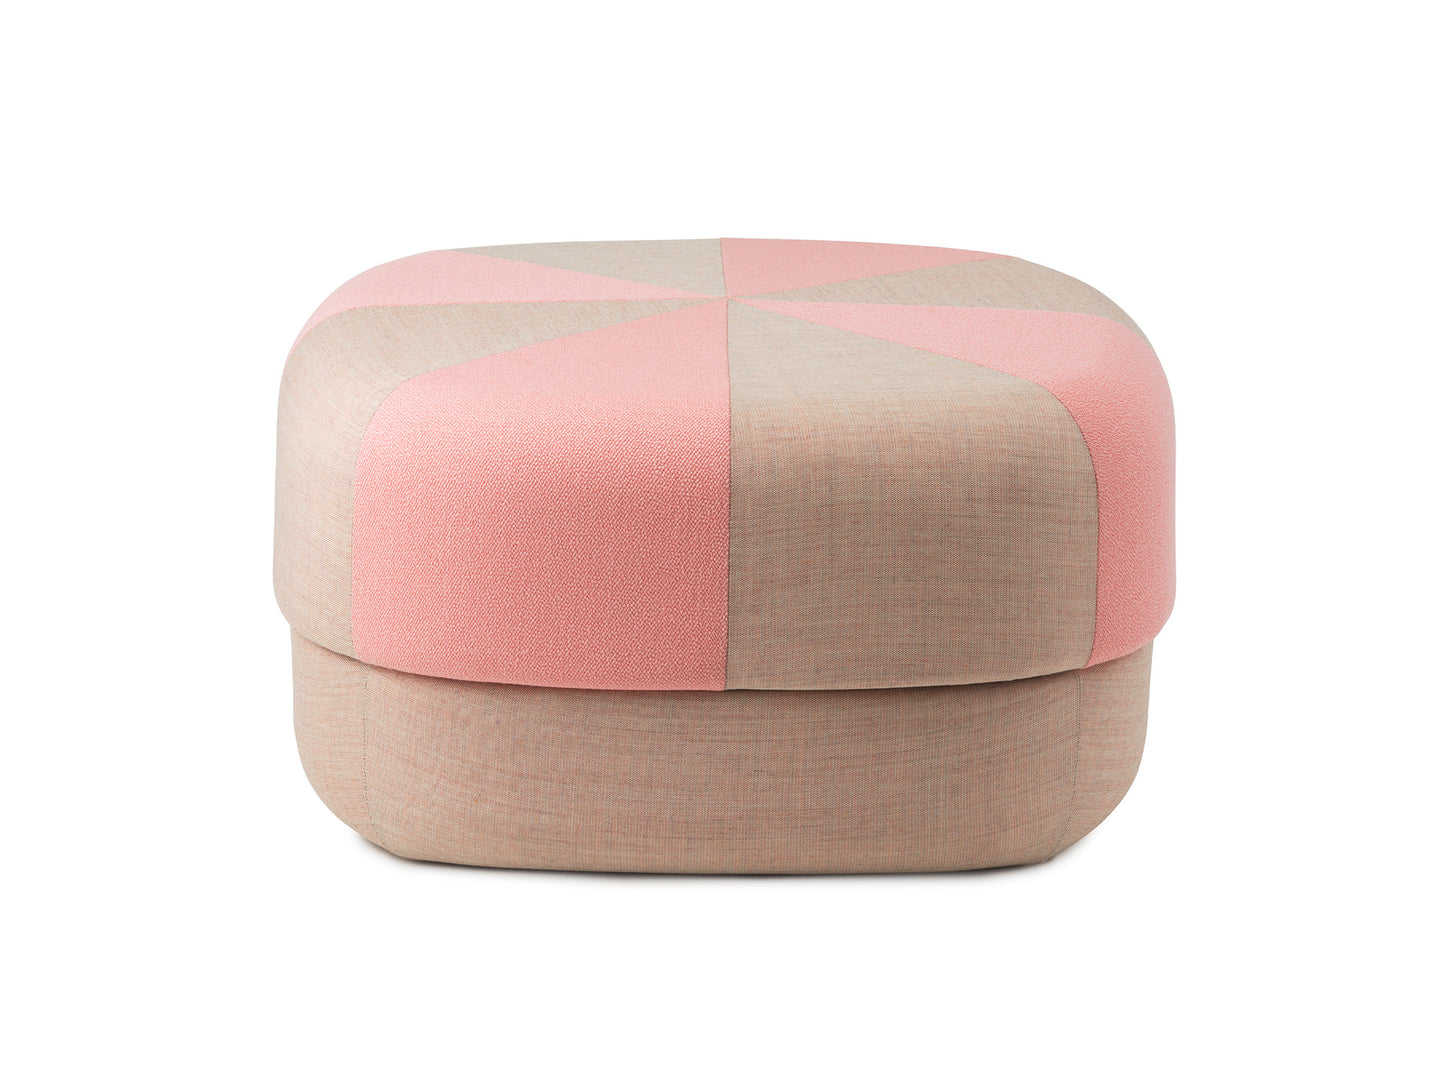 Circus Pouf Duo by Normann Copenhagen - Large / Rose